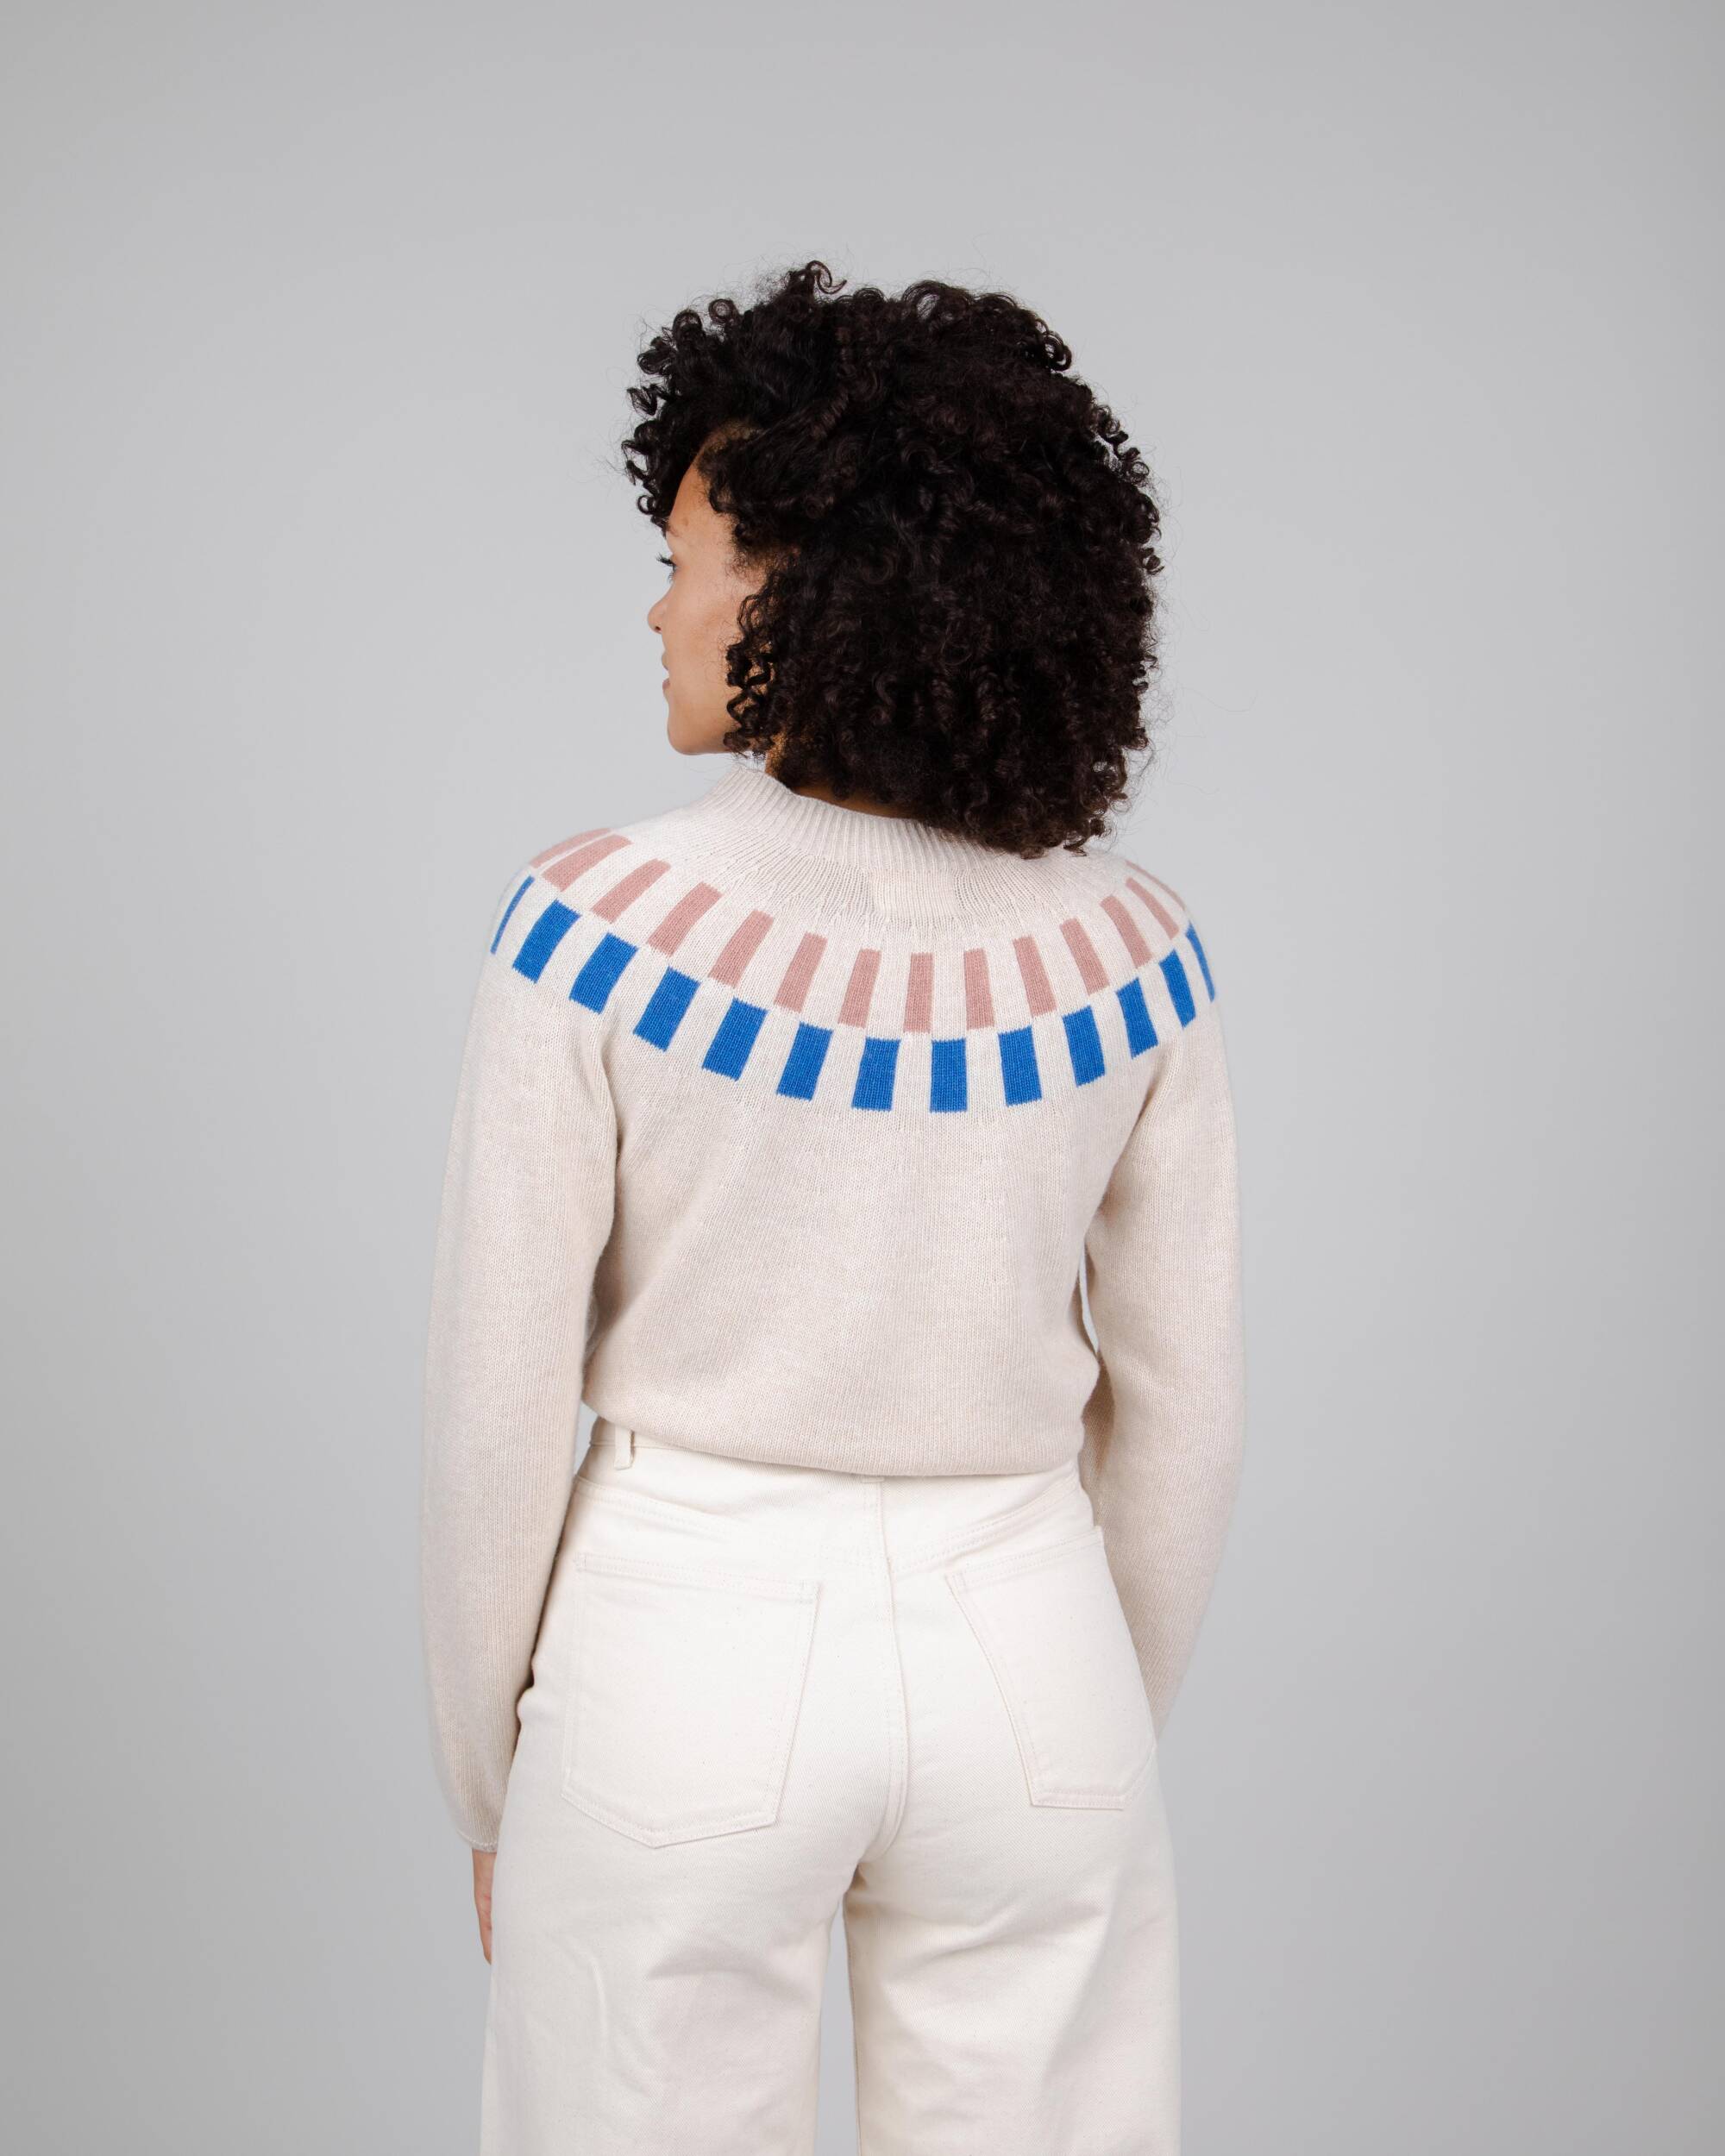 Colorful sweater cube jacquard made from recycled wool from Brava Fabrics